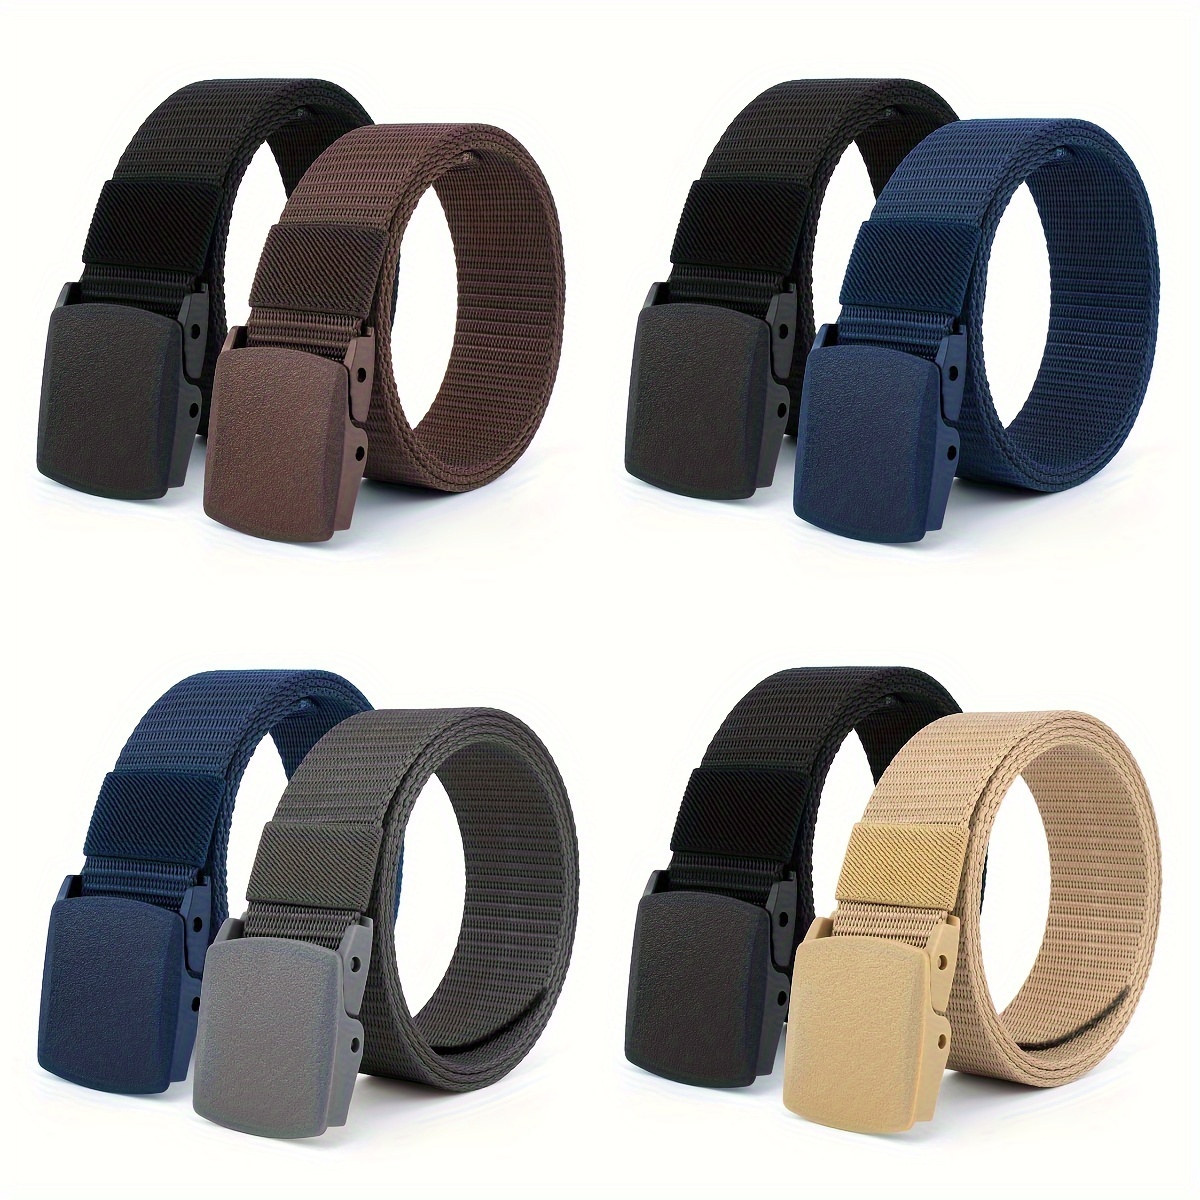 

2pcs Fashionable Belts, Smooth Buckle, Brief And Simple Design, Useful And Durable, For Business Casual Wear Festival Party Work